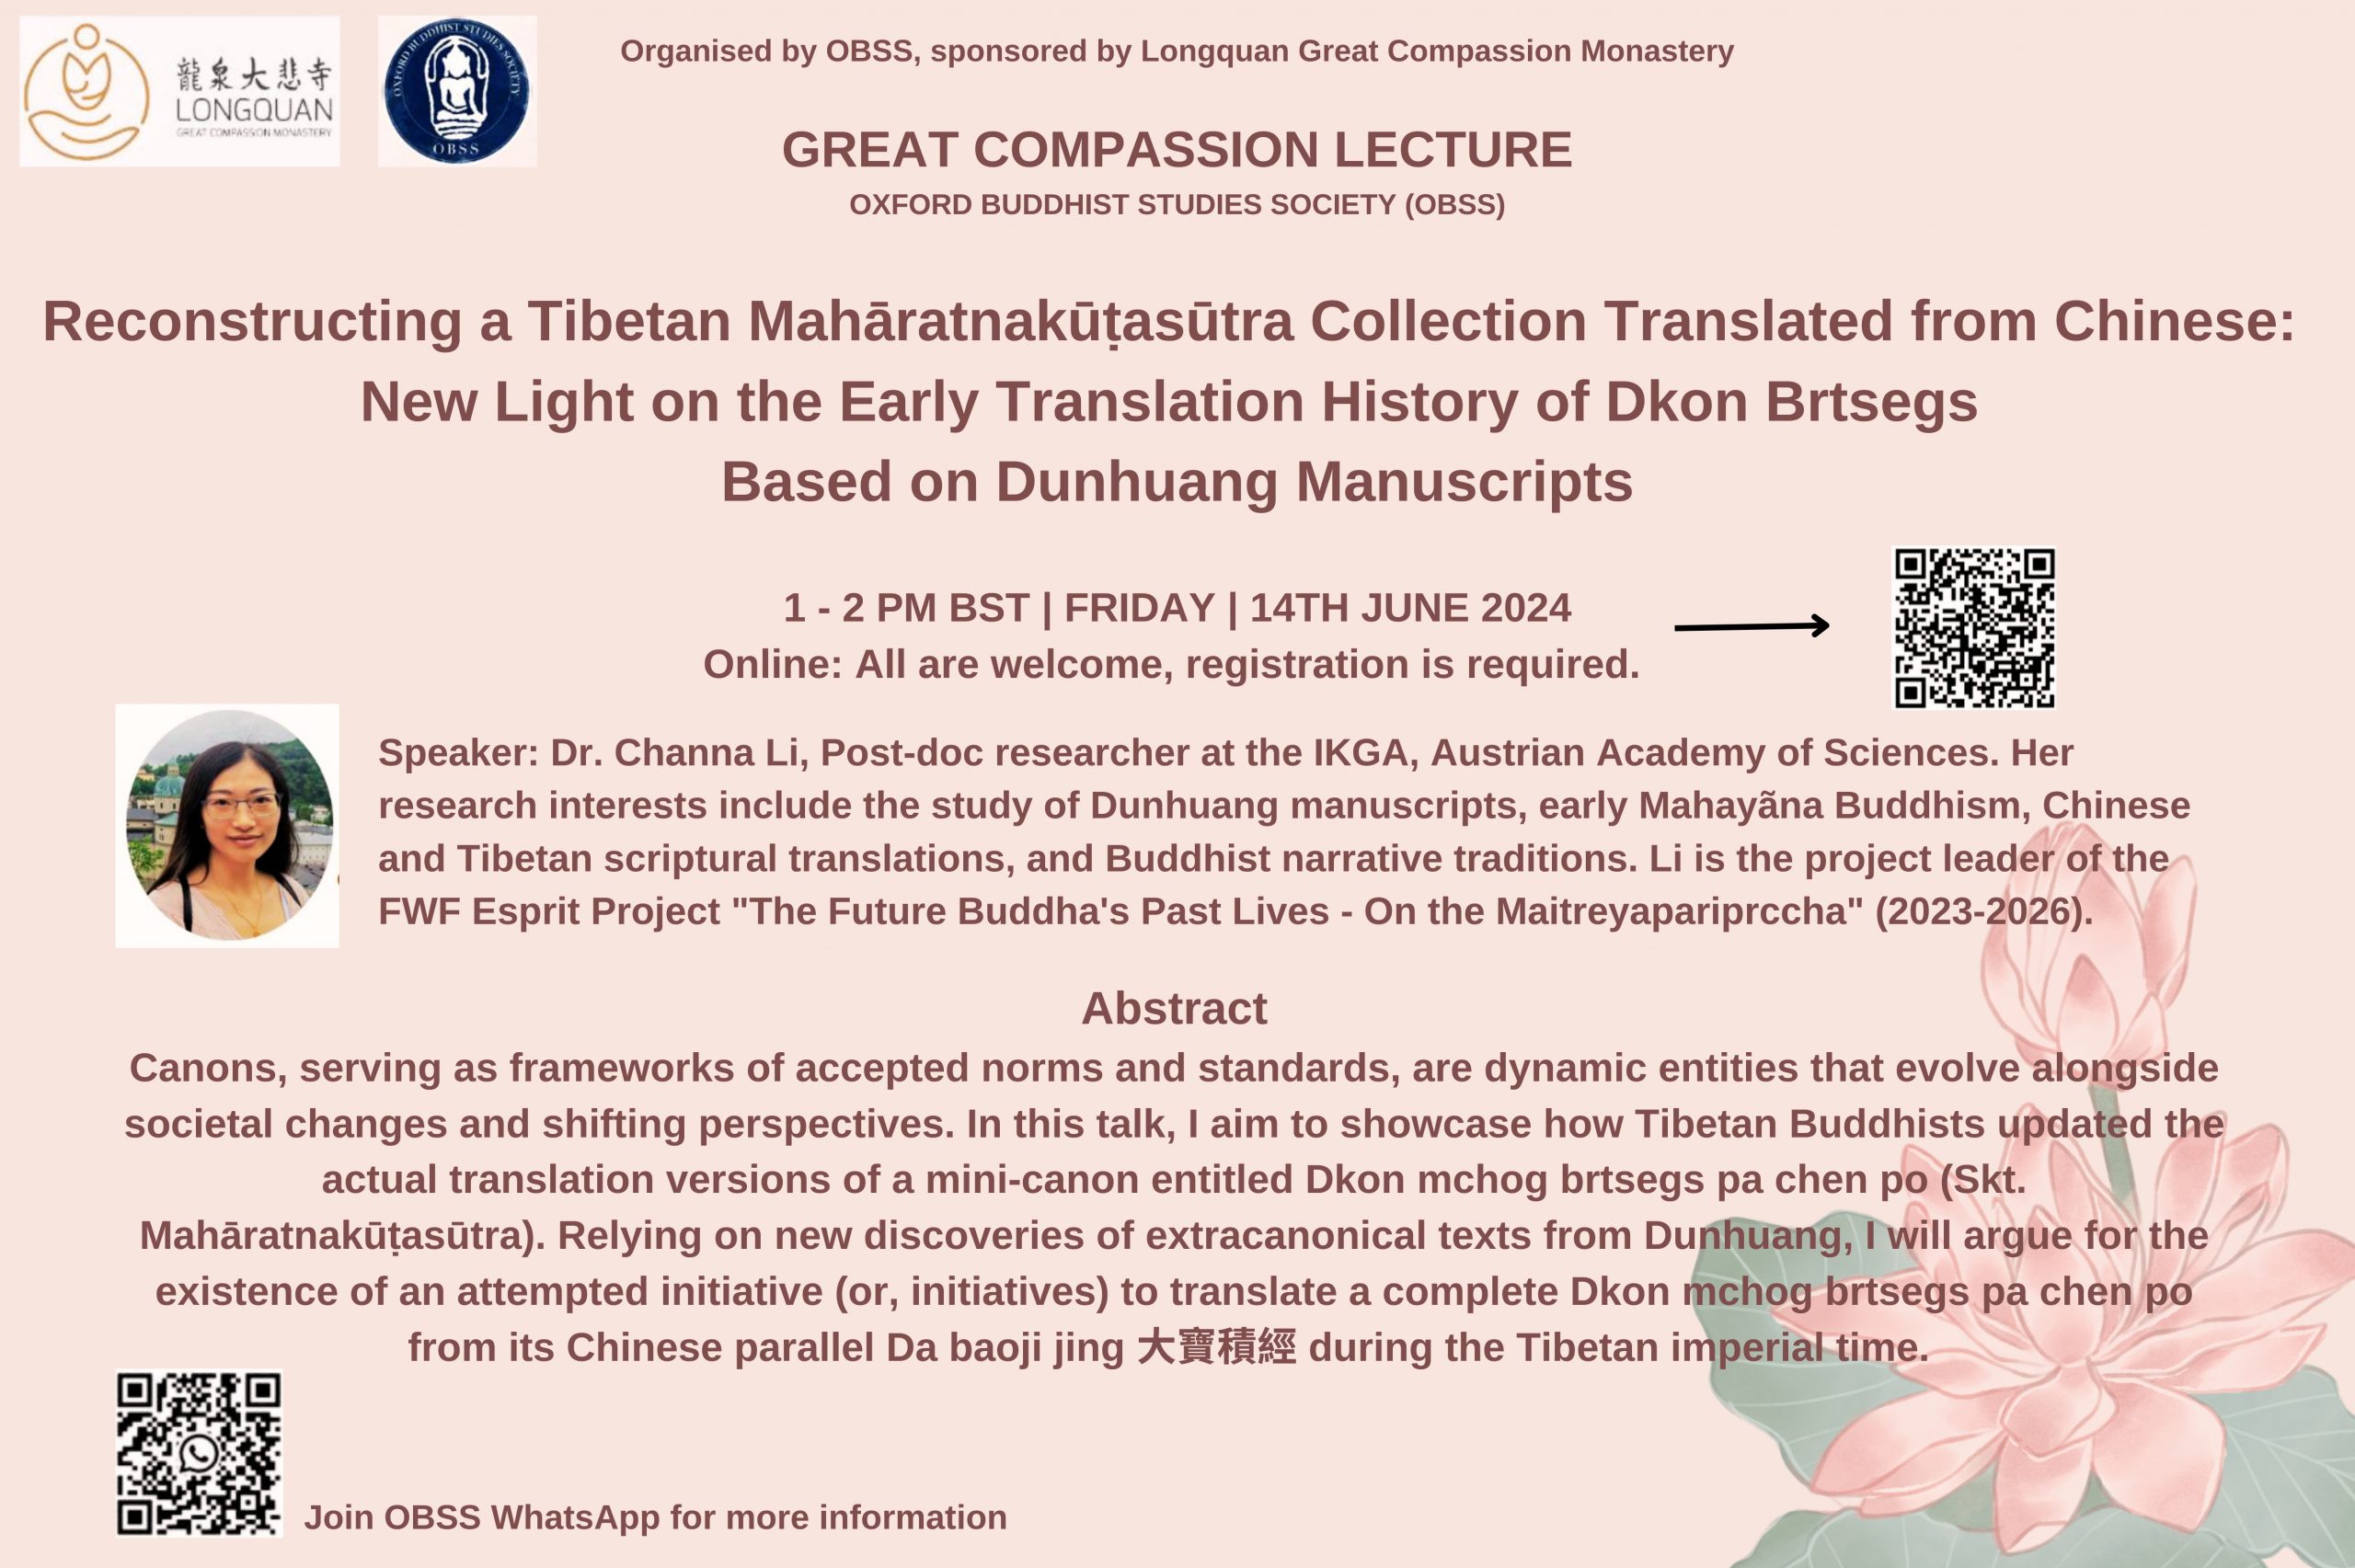 Lecture: Reconstructing a Tibetan Mahratnakütasutra Collection Translated from Chinese